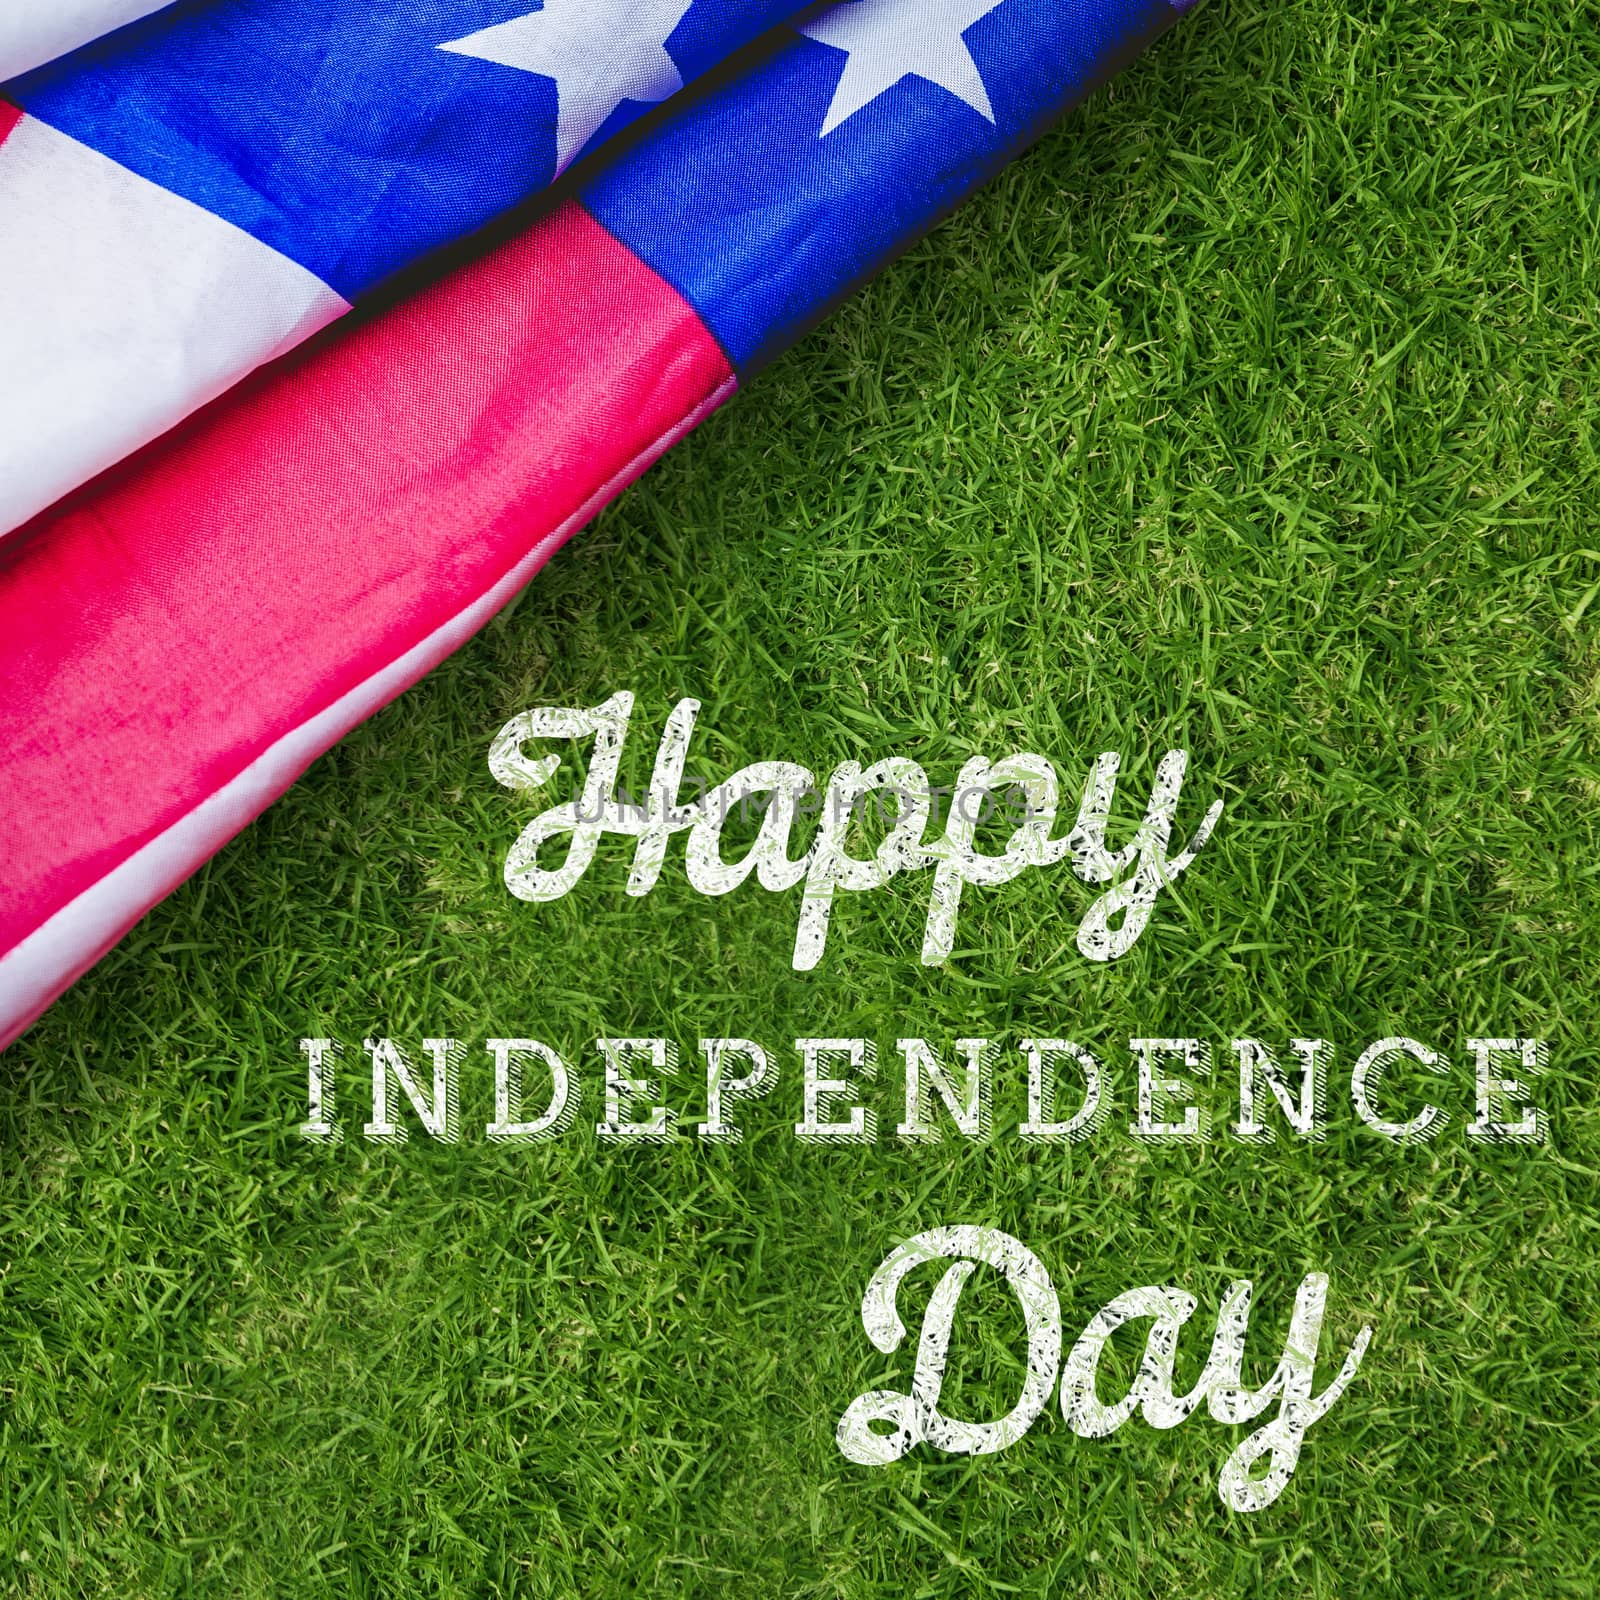 Independence day graphic against closed up view of grass